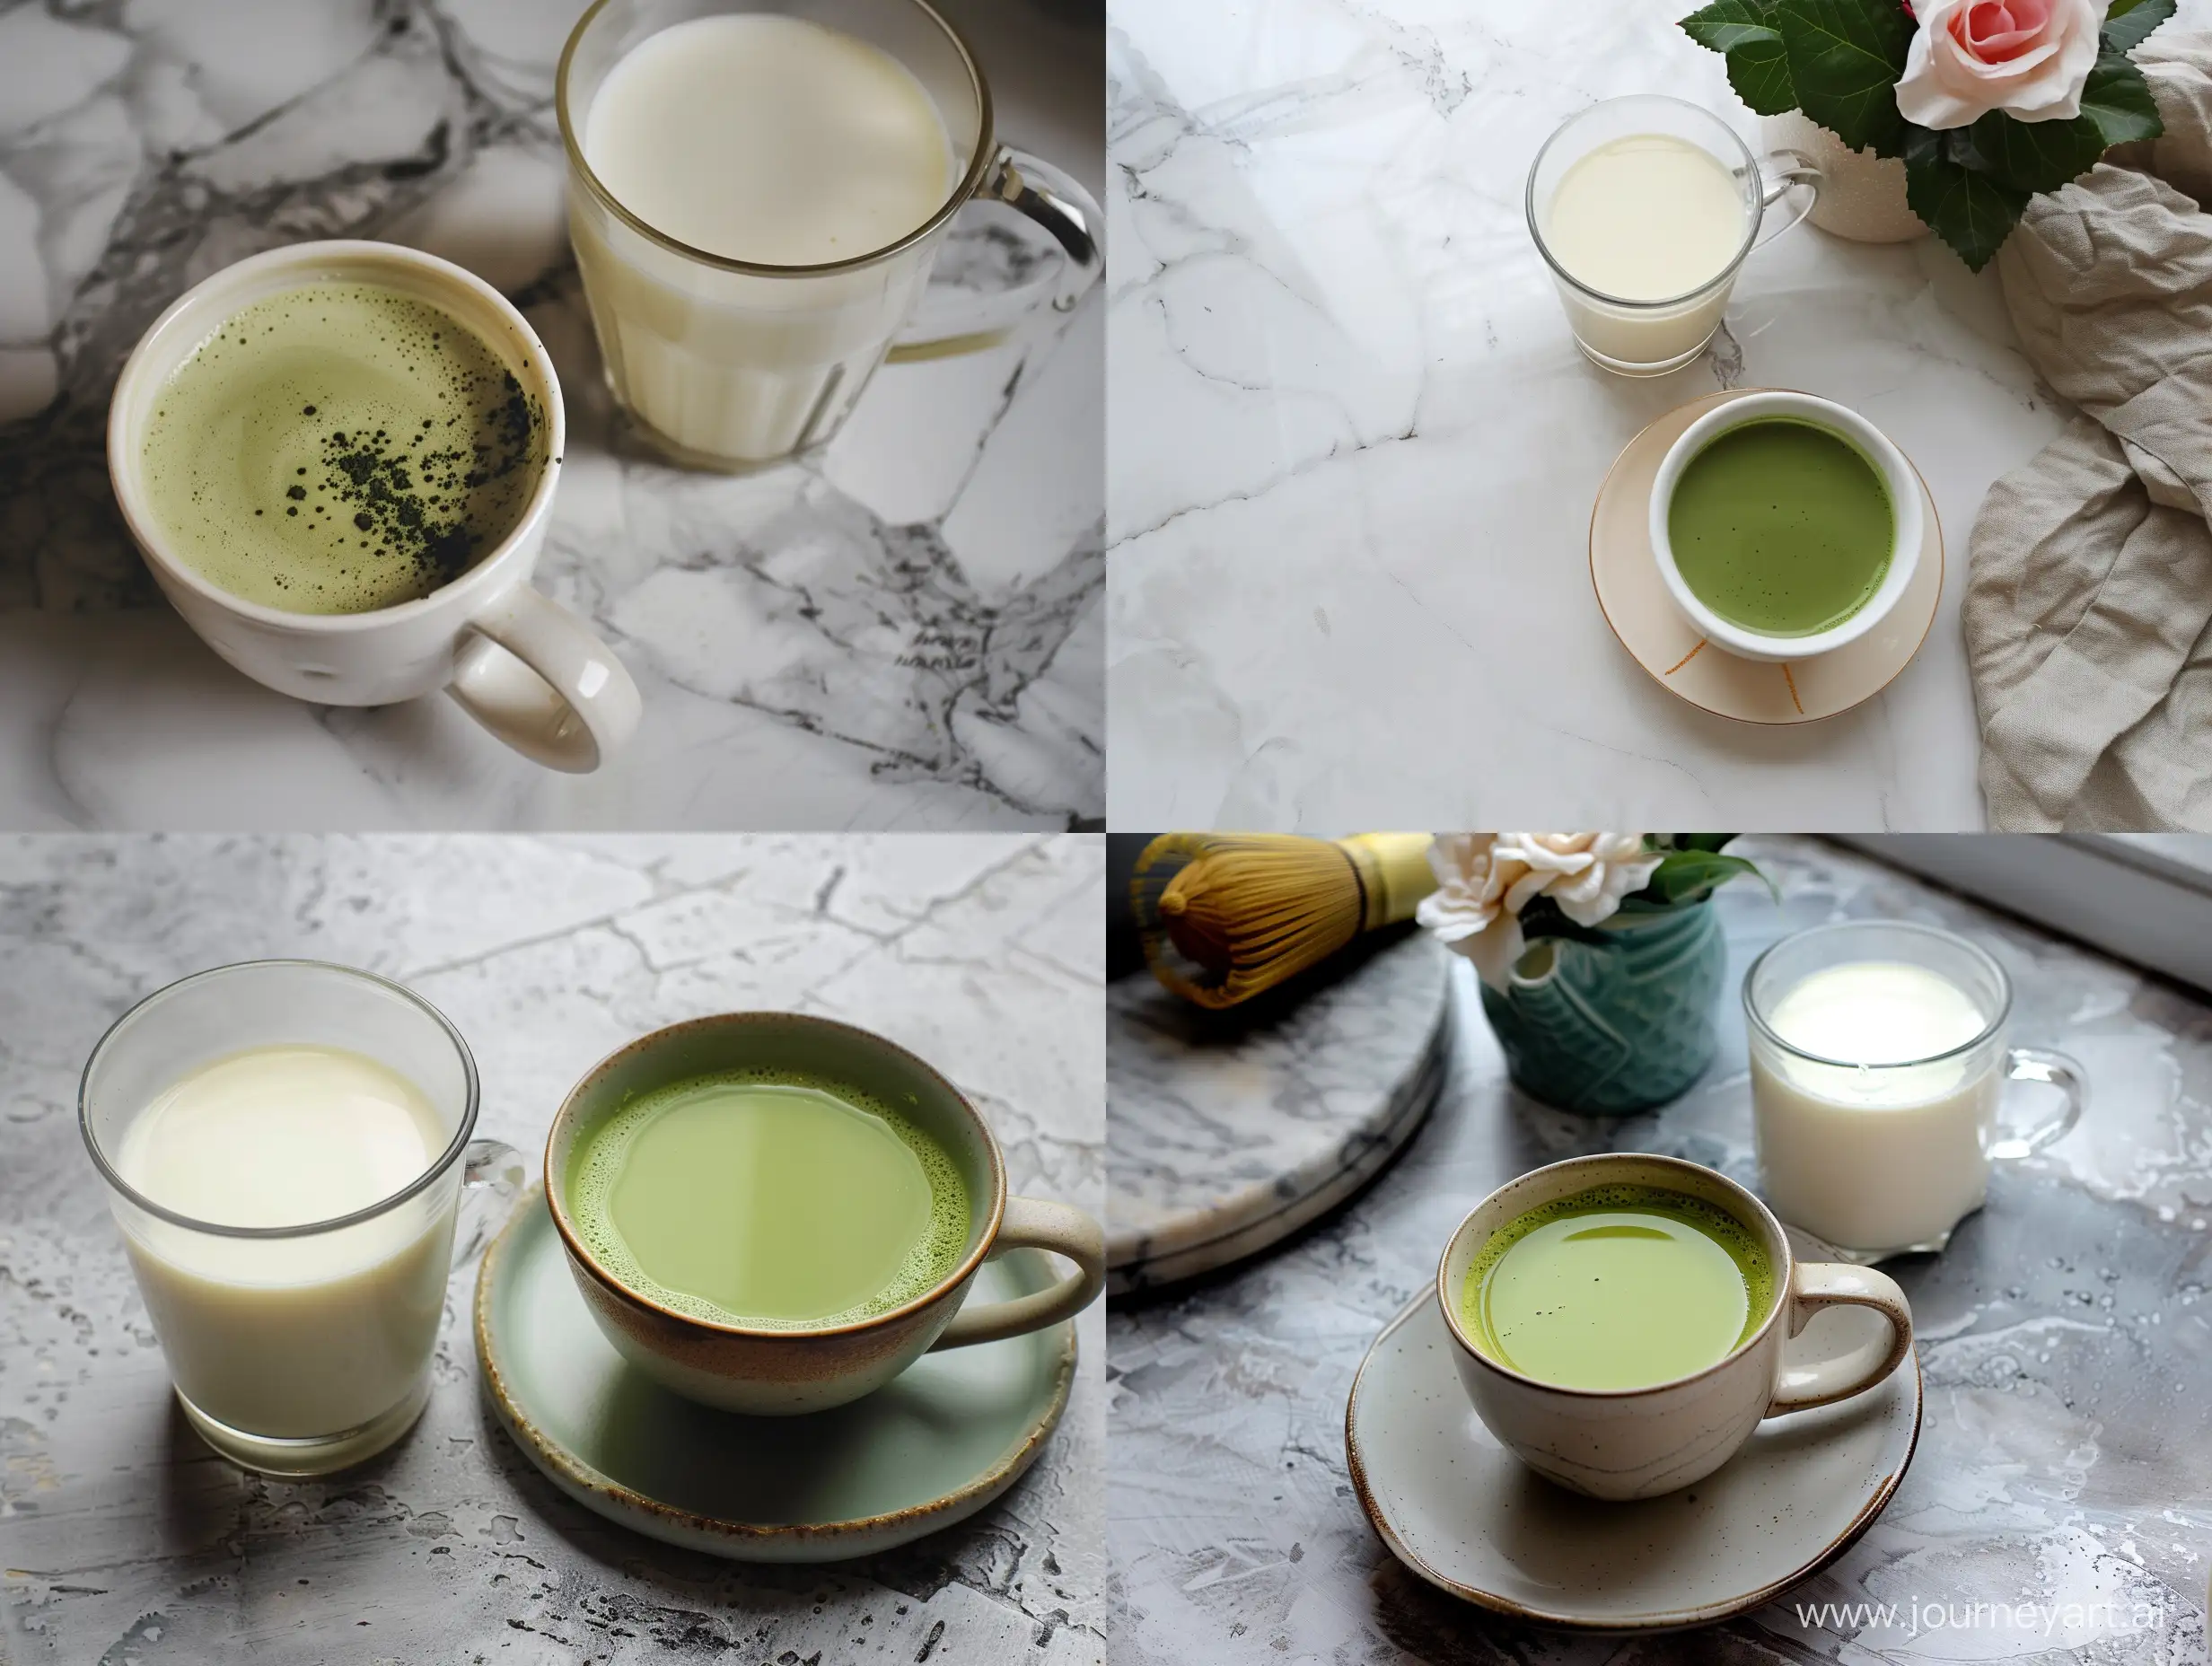 Natural and real photo of a cup of matcha tea and a glass of milk.